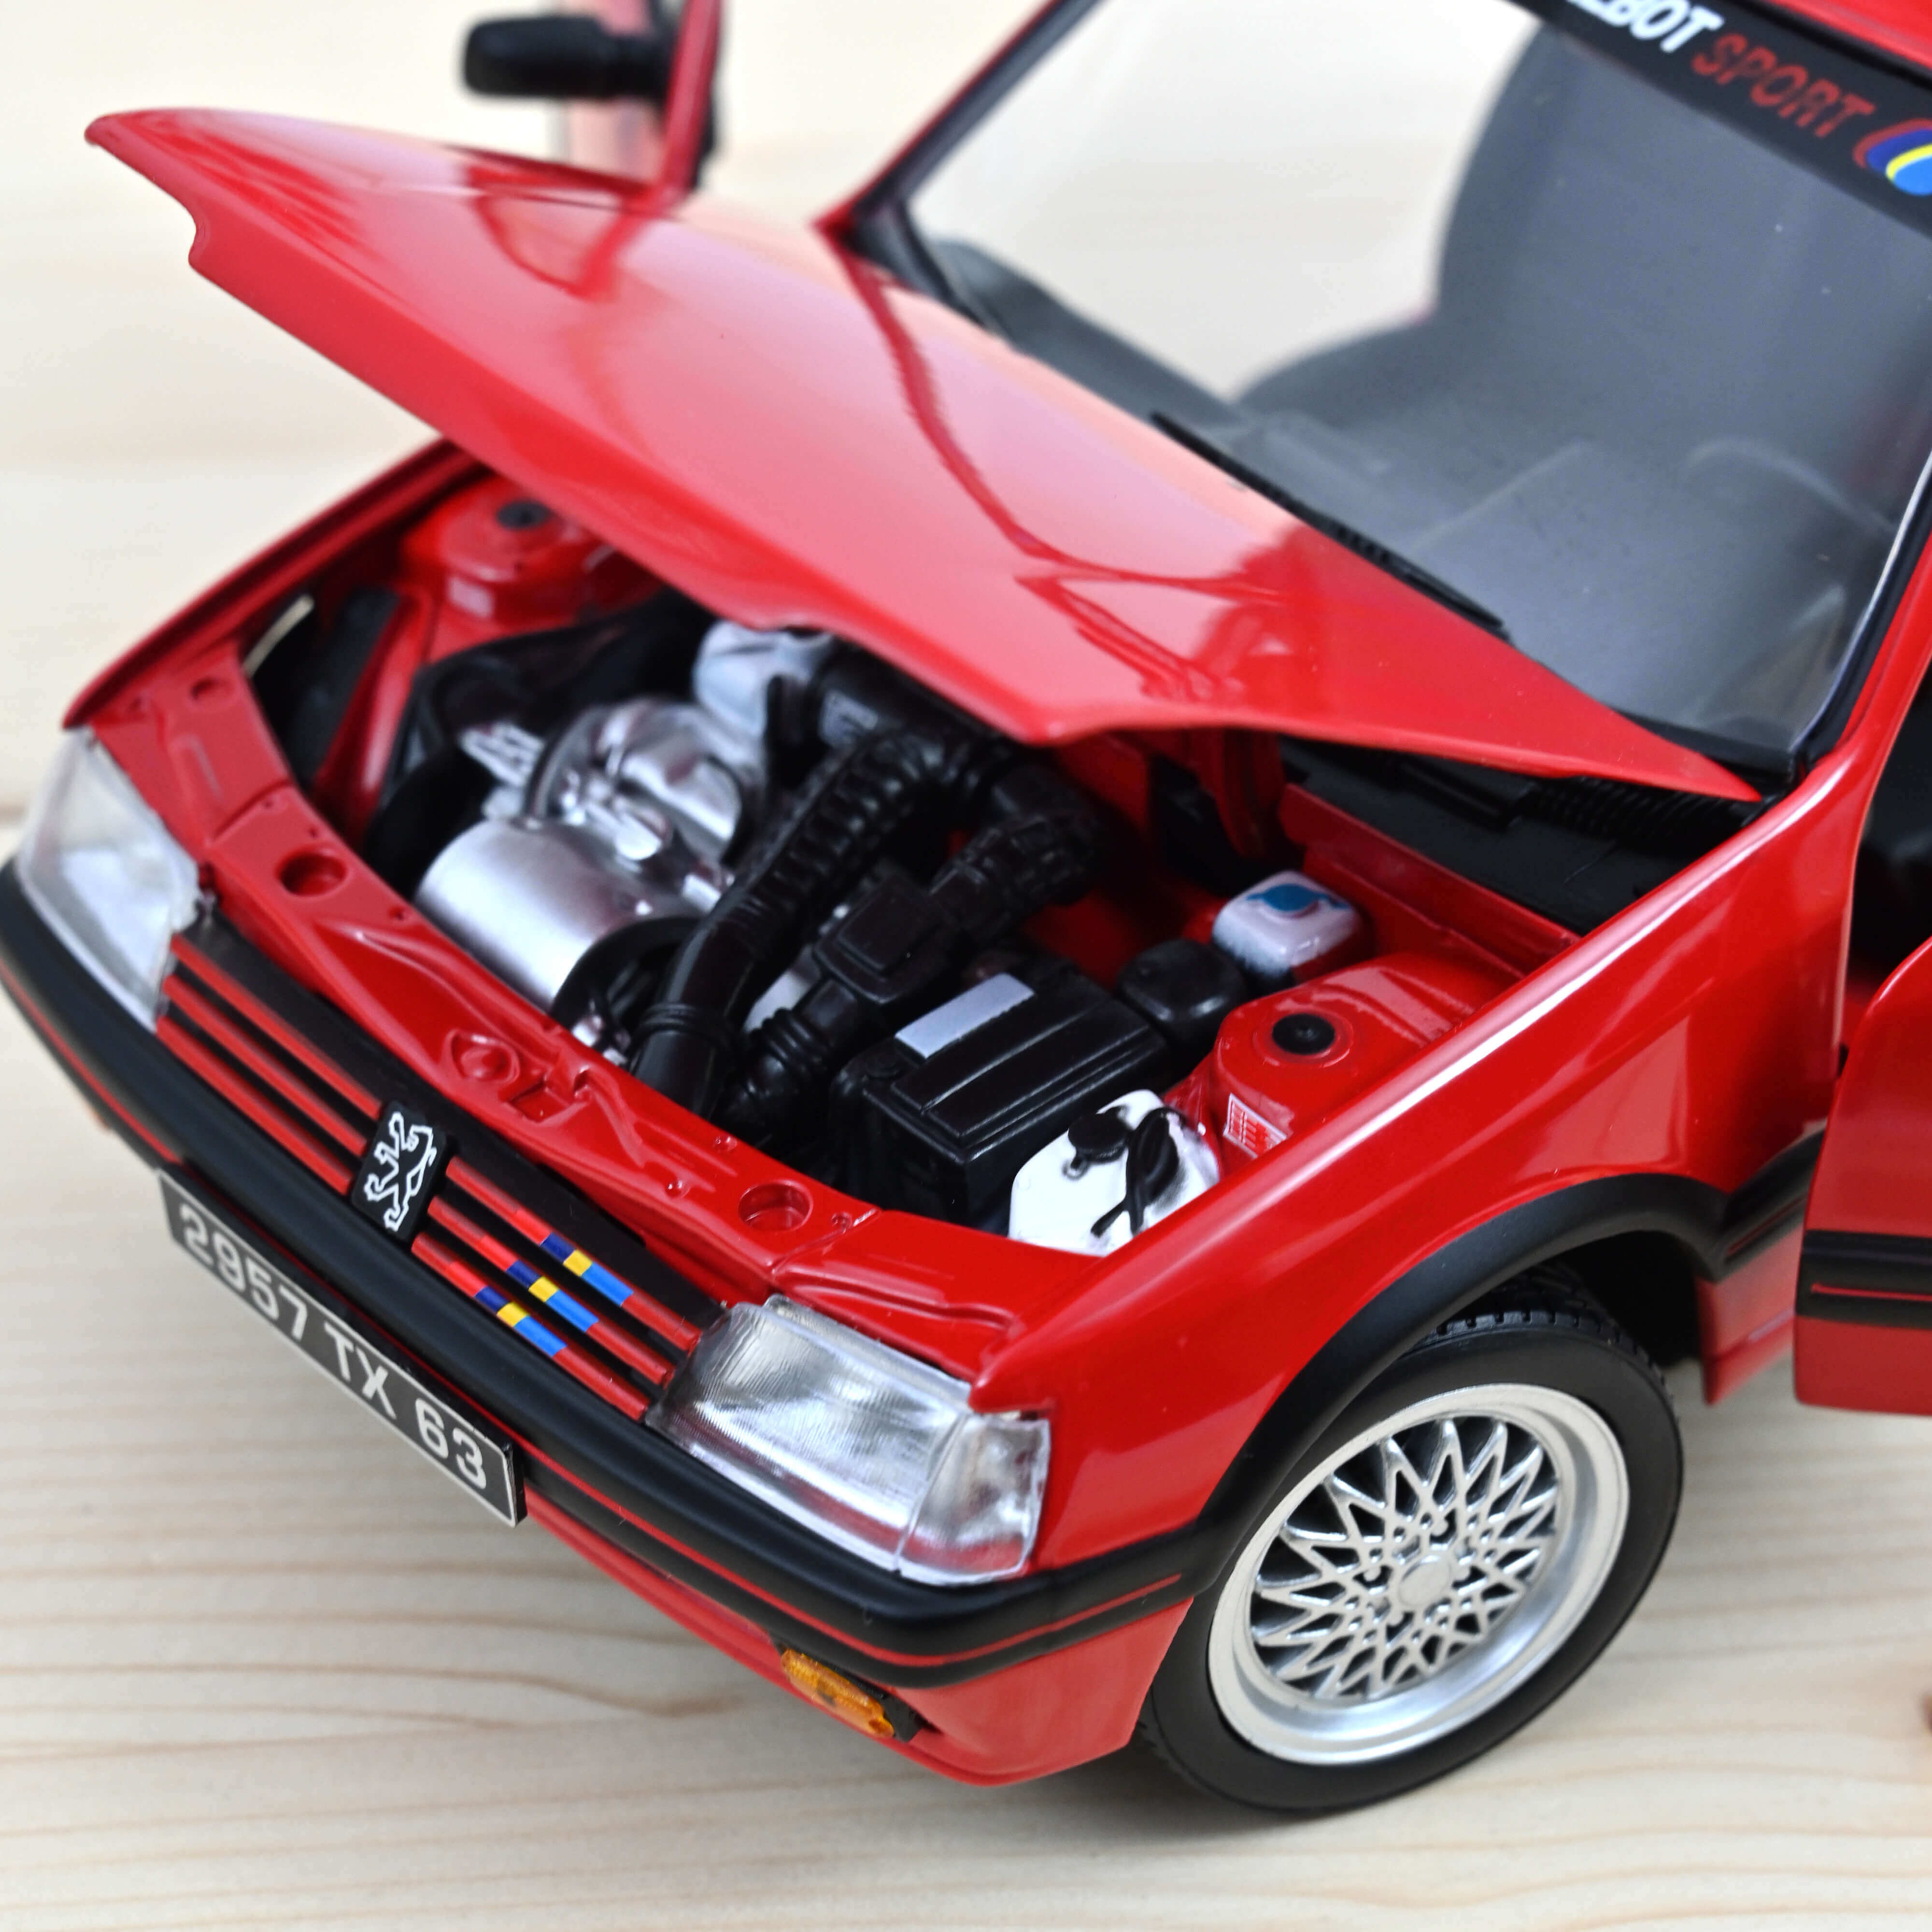 Peugeot 205 GTi 1.9 PTS rot PTS deco 1991 Vallelunga Red 1:18